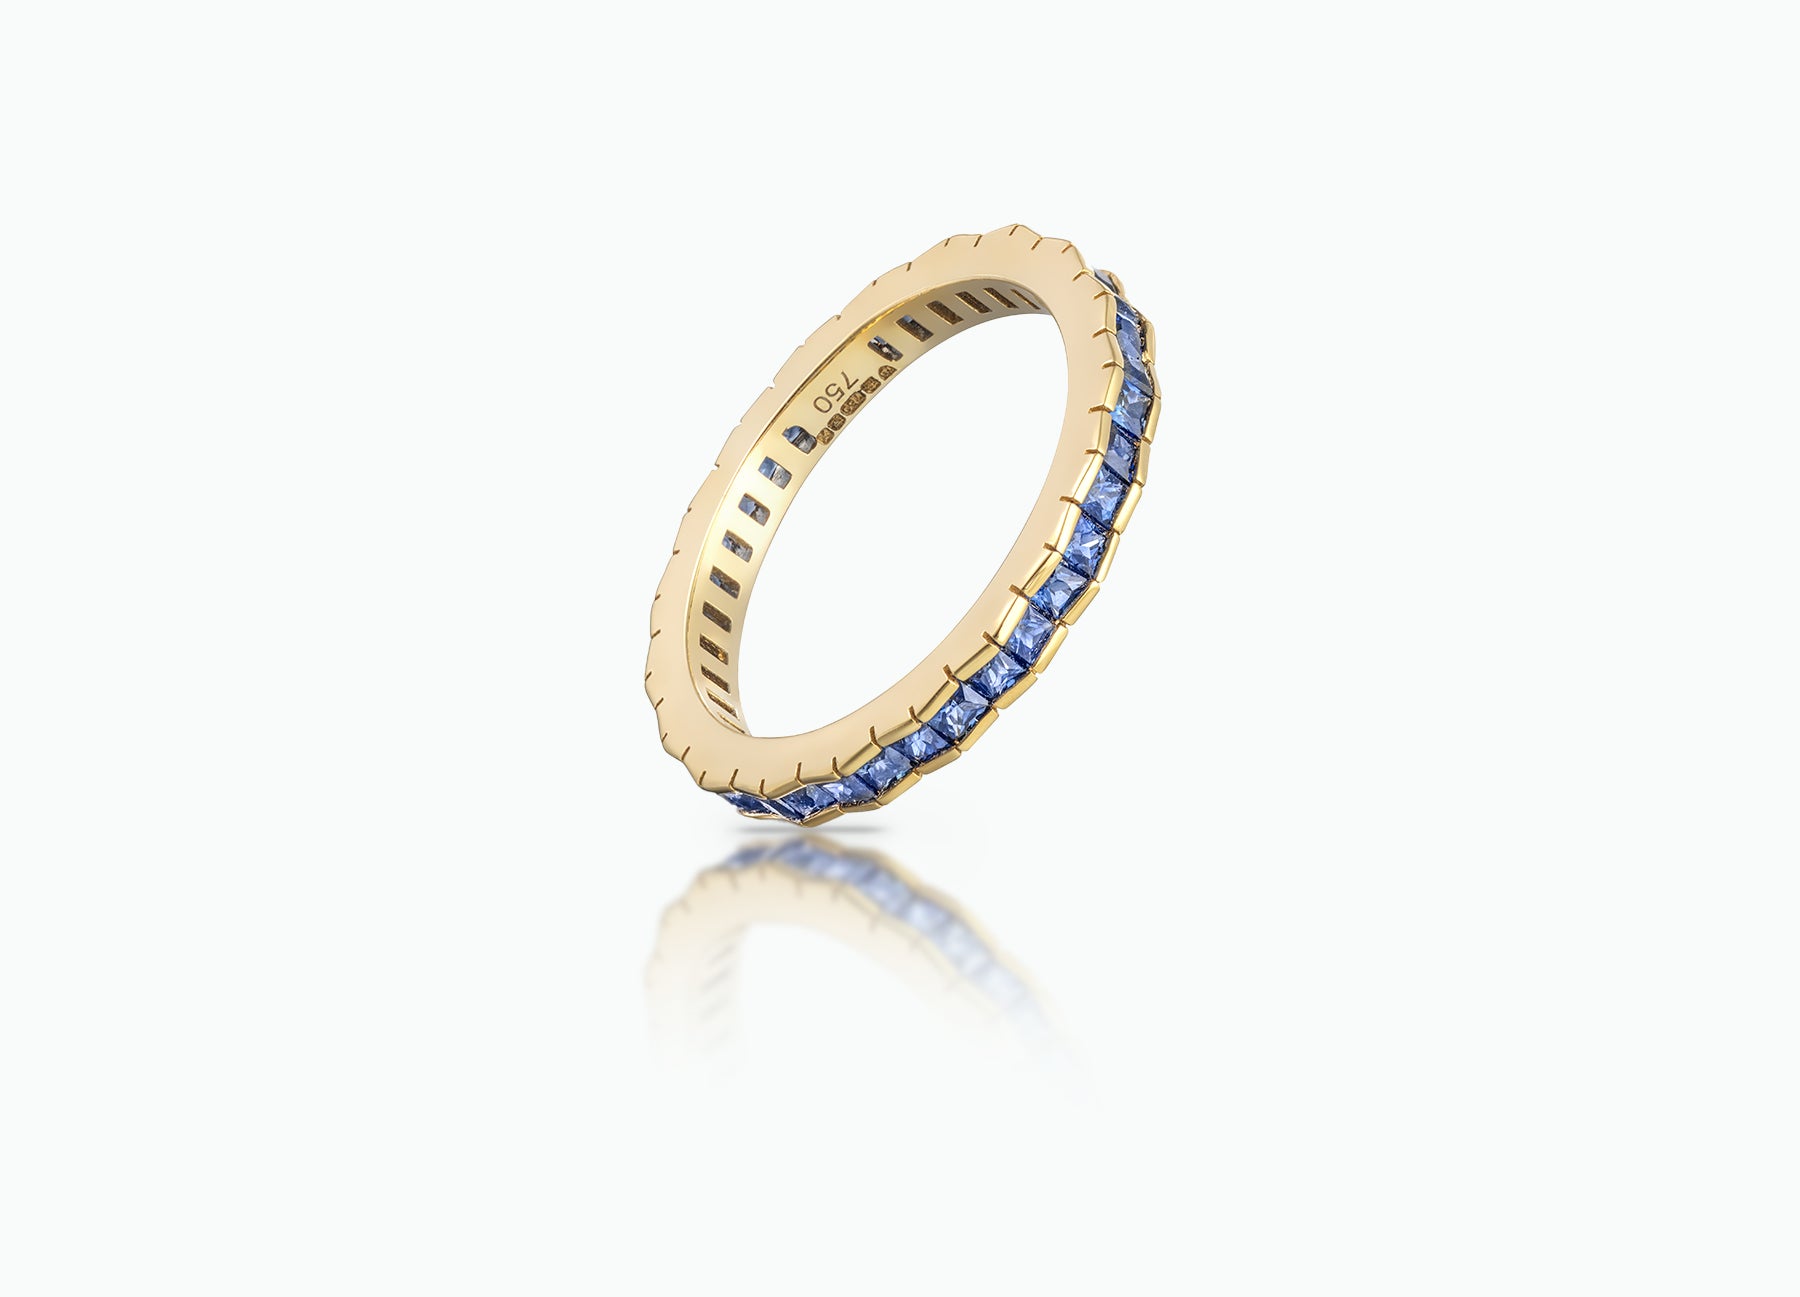 Eternity Stack Ring crafted from 18k yellow Gold and set with blue Sapphires.